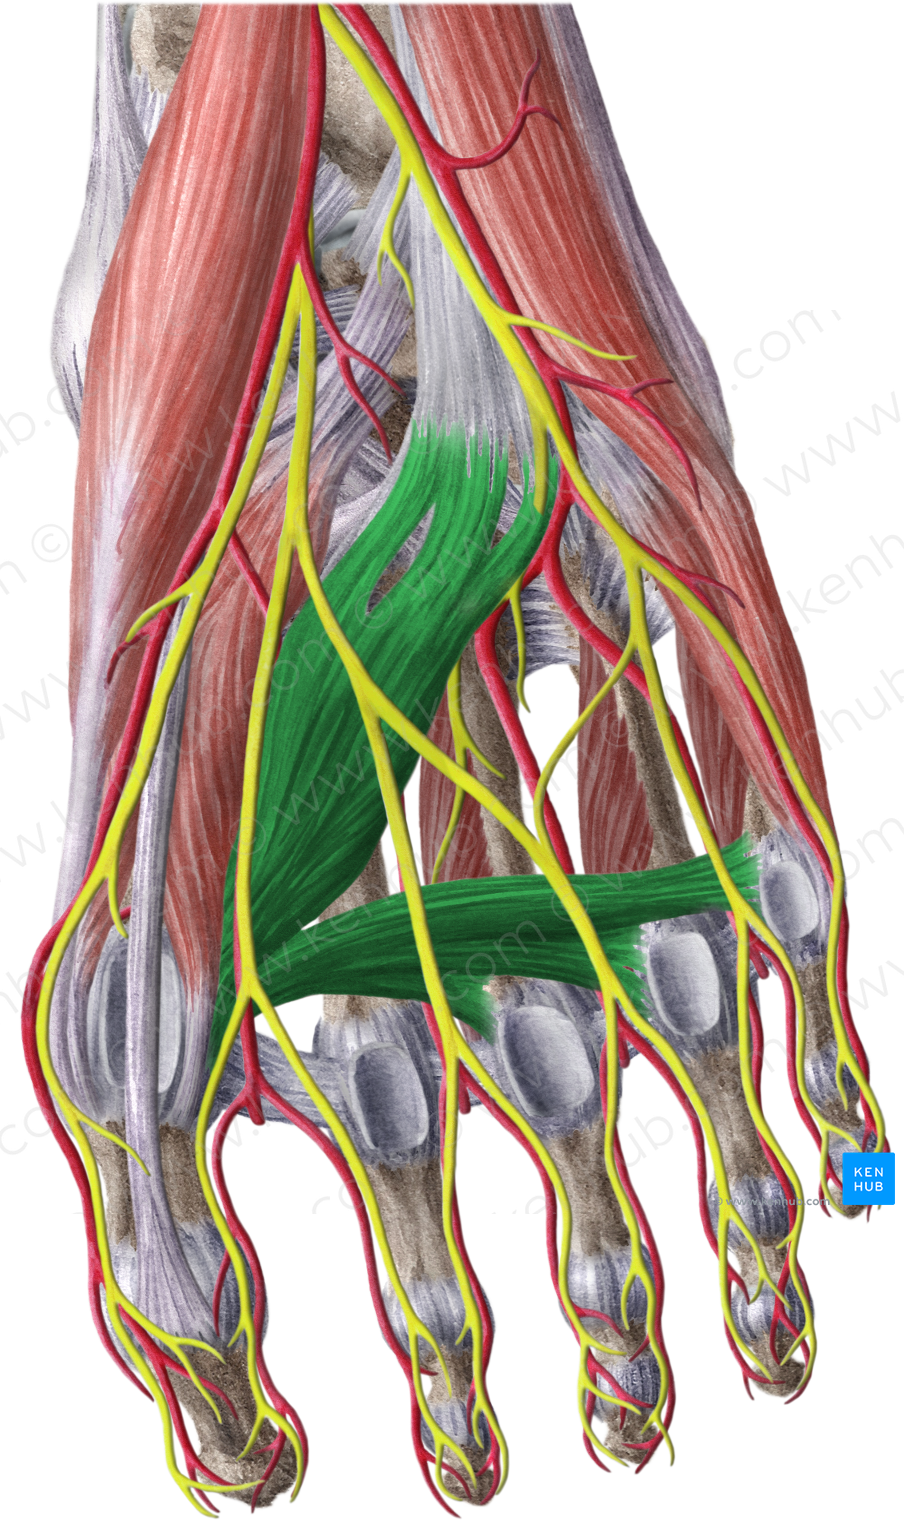 Adductor hallucis muscle (#5181)